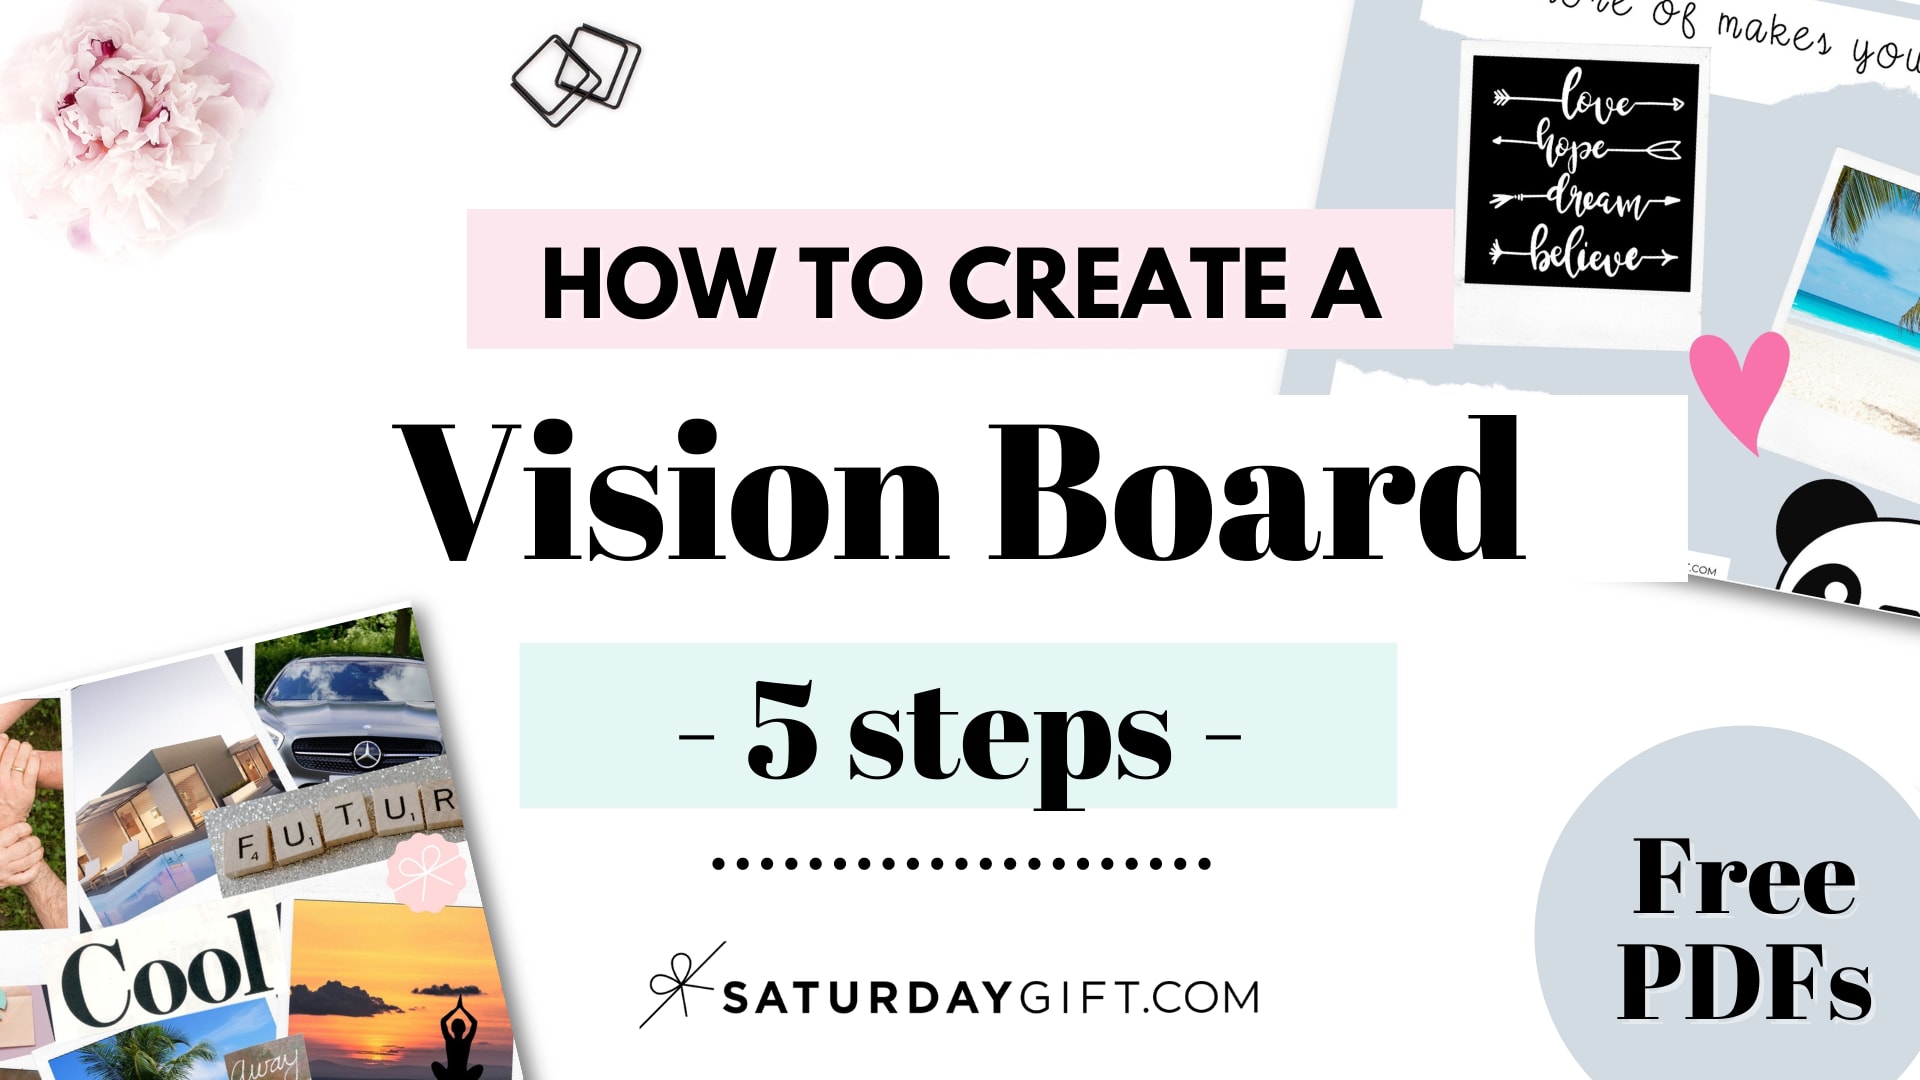 Vision board: How to create one & reach your goals and dreams